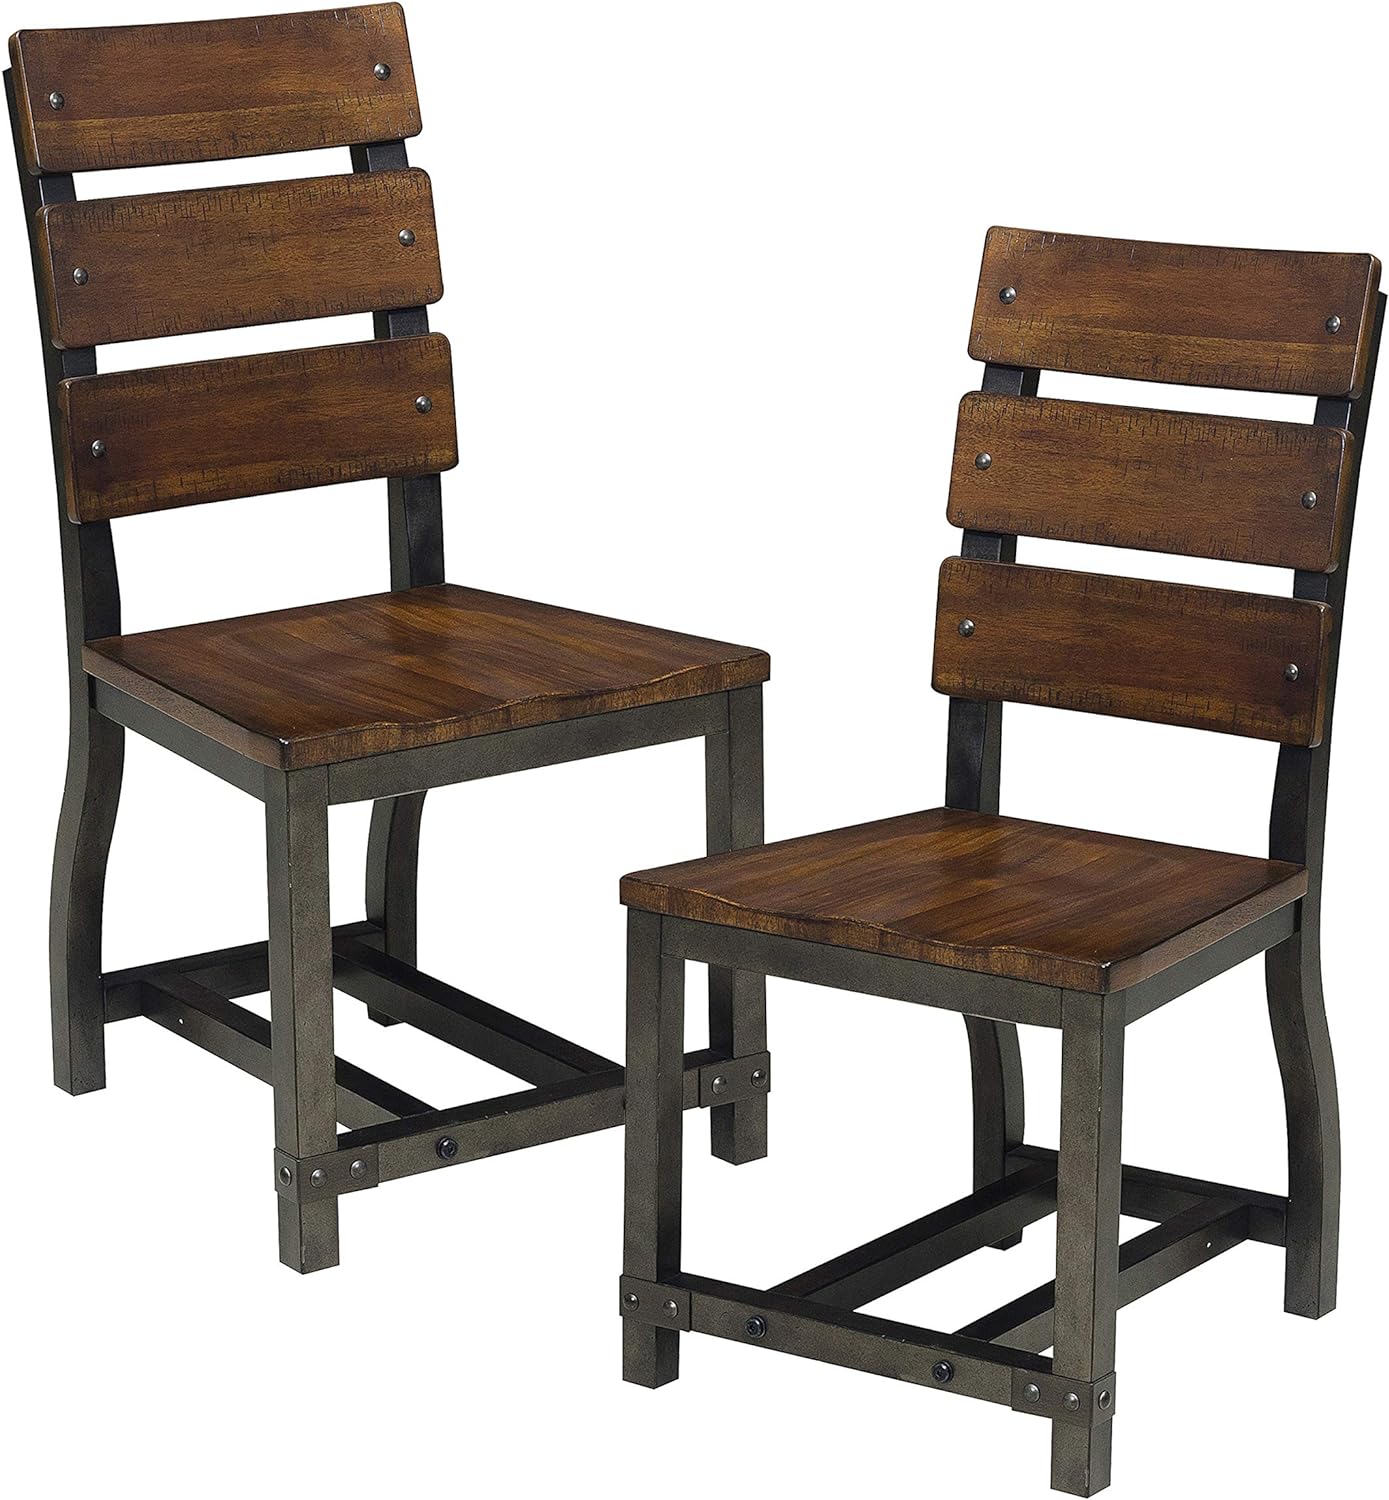 NEW Homelegance Holverson Traditional Height Acacia Wood Chairs set of 2, Rustic Brown - Made in Vietnam, RETAILS $350+ FOR SET OF 2 CHAIRS